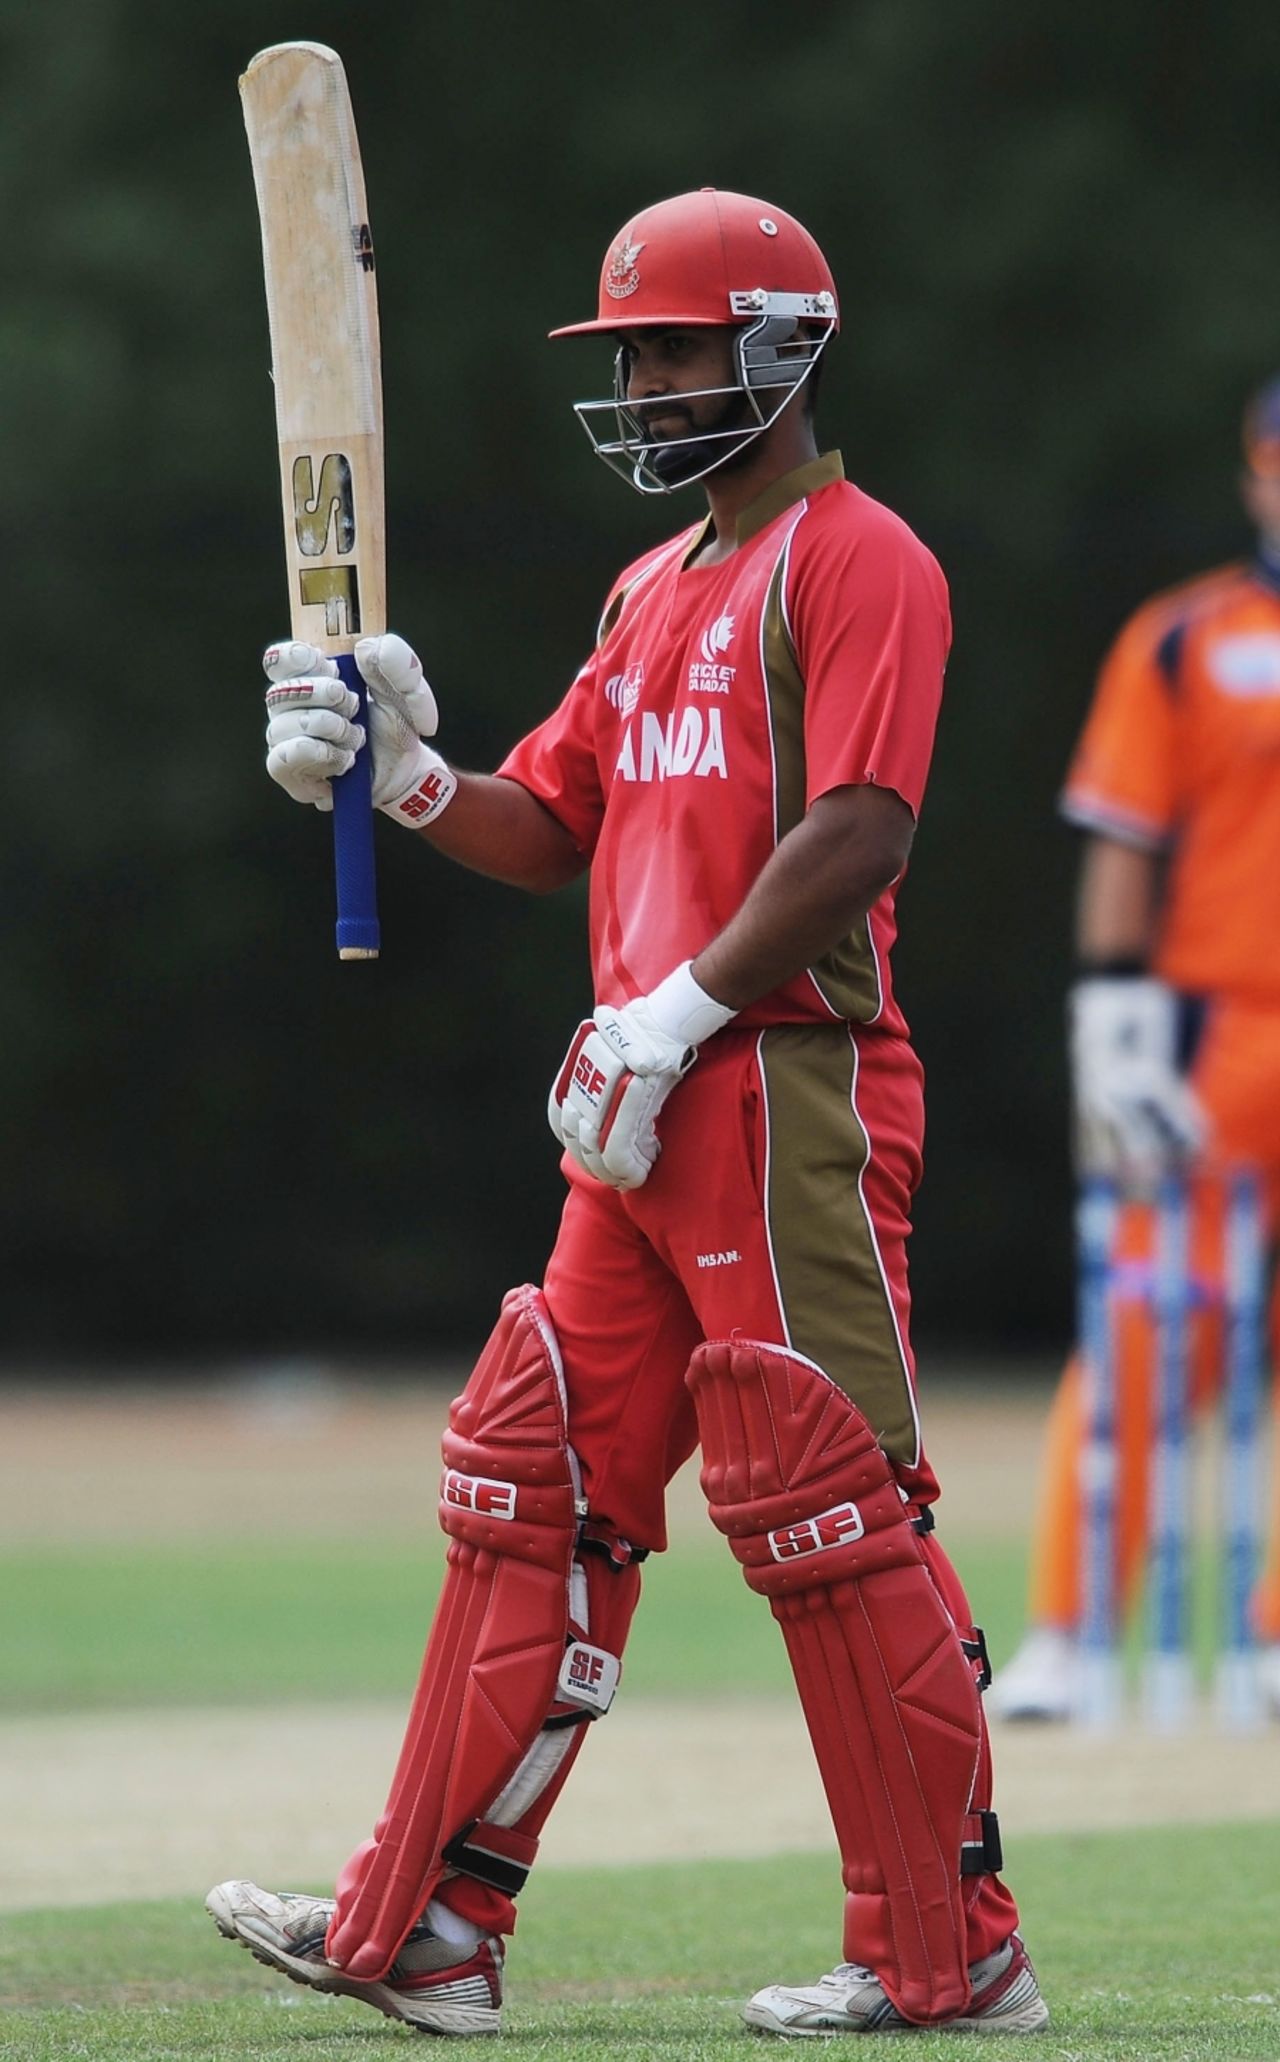 Ashish Bagai topscored for Canada with 71 against Netherlands, Netherlands v Canada, ICC WCL Division 1, Rotterdam, July 5 2010